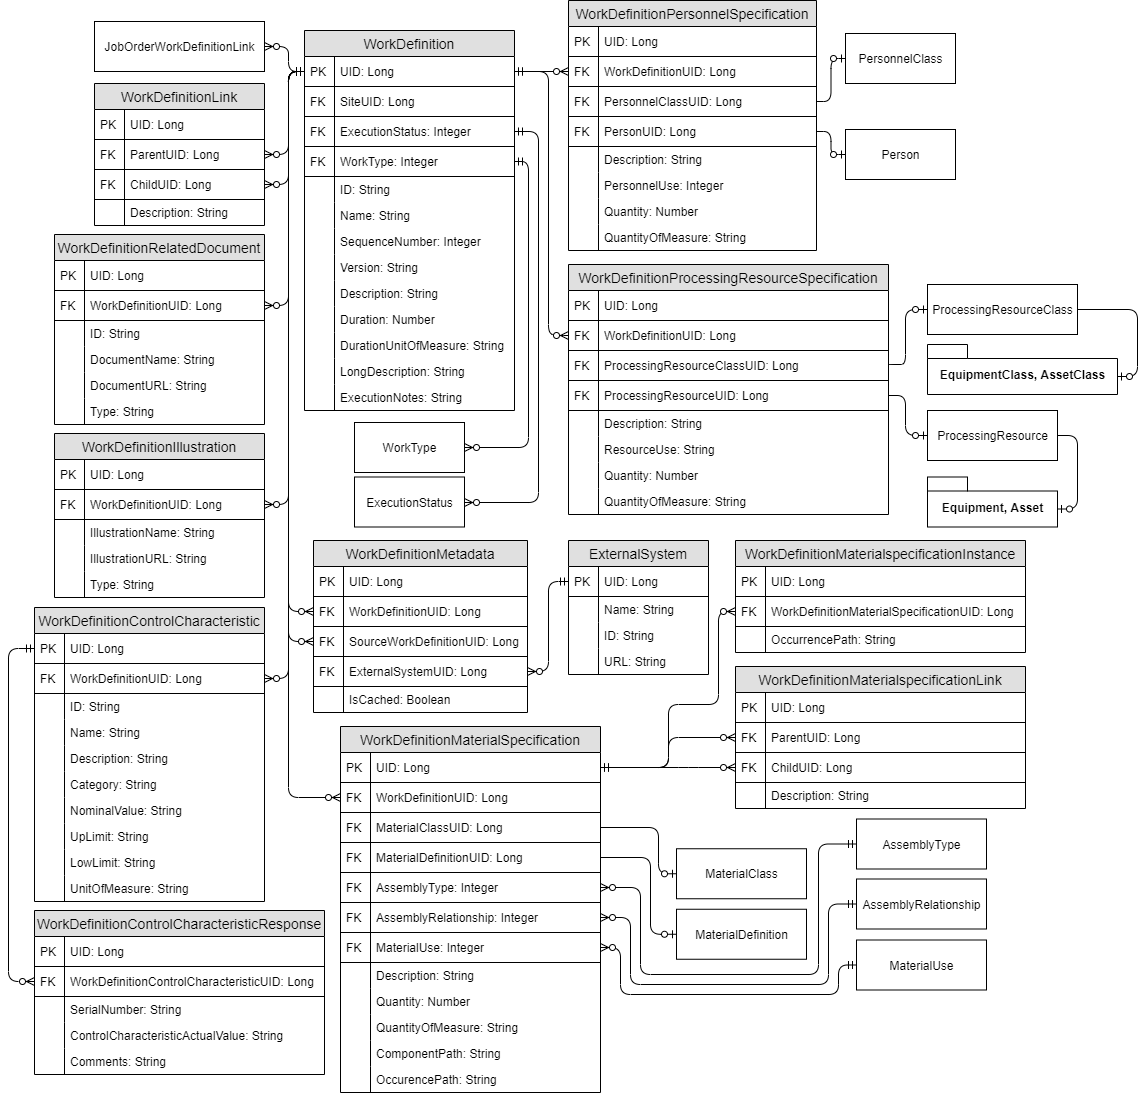 Schema diagram for the work definition database objects.